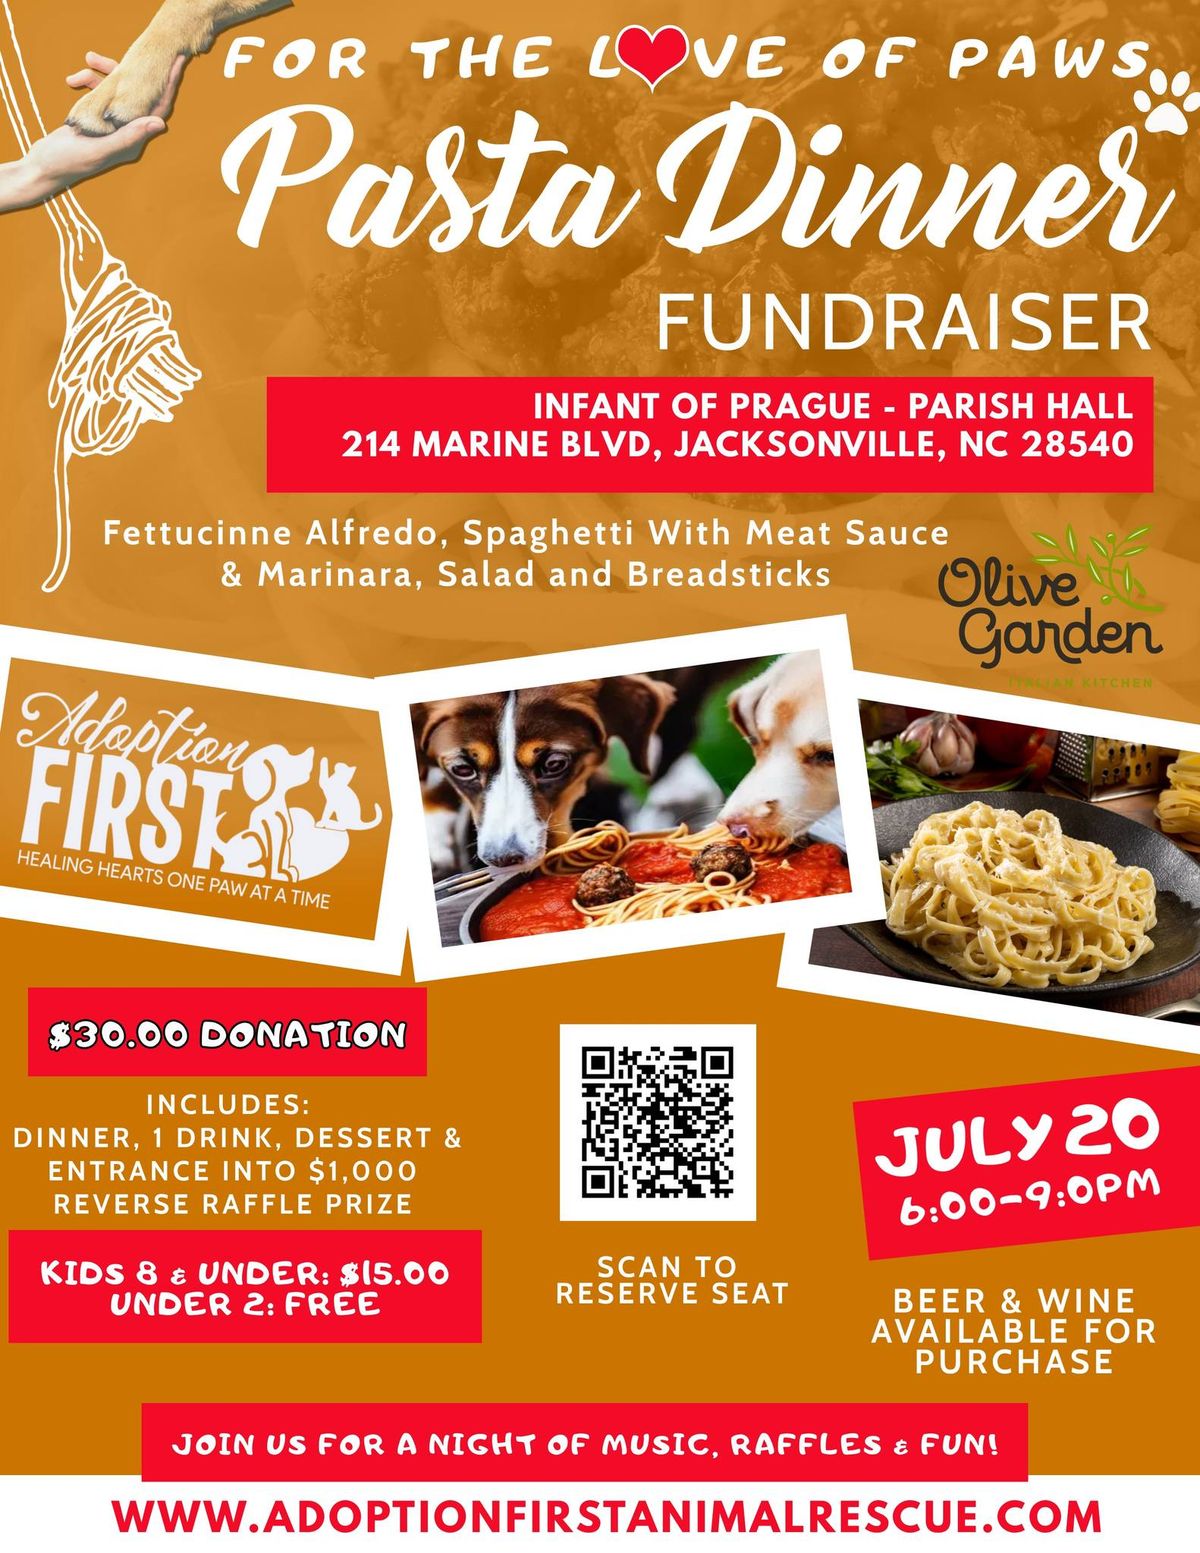 For the Love of Paws Pasta Night Fundraiser 